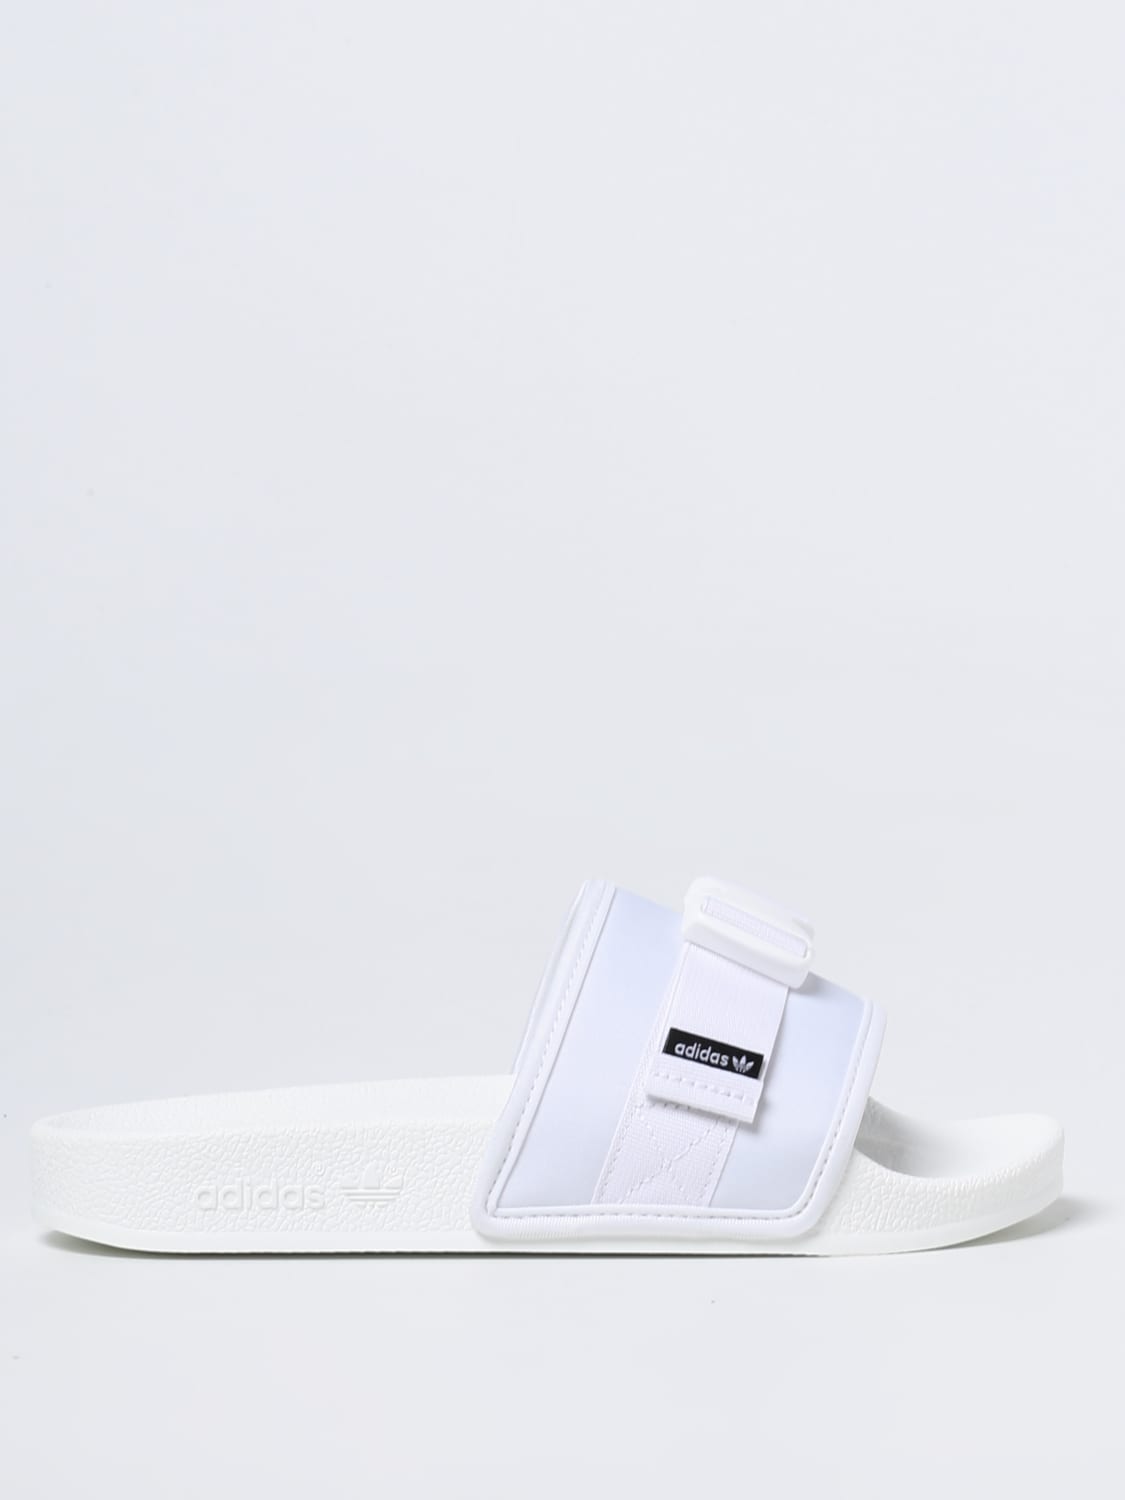 Adidas Originals Outlet: Sandal Pouchylette W in fabric - Adidas GZ4329 online on GIGLIO.COM